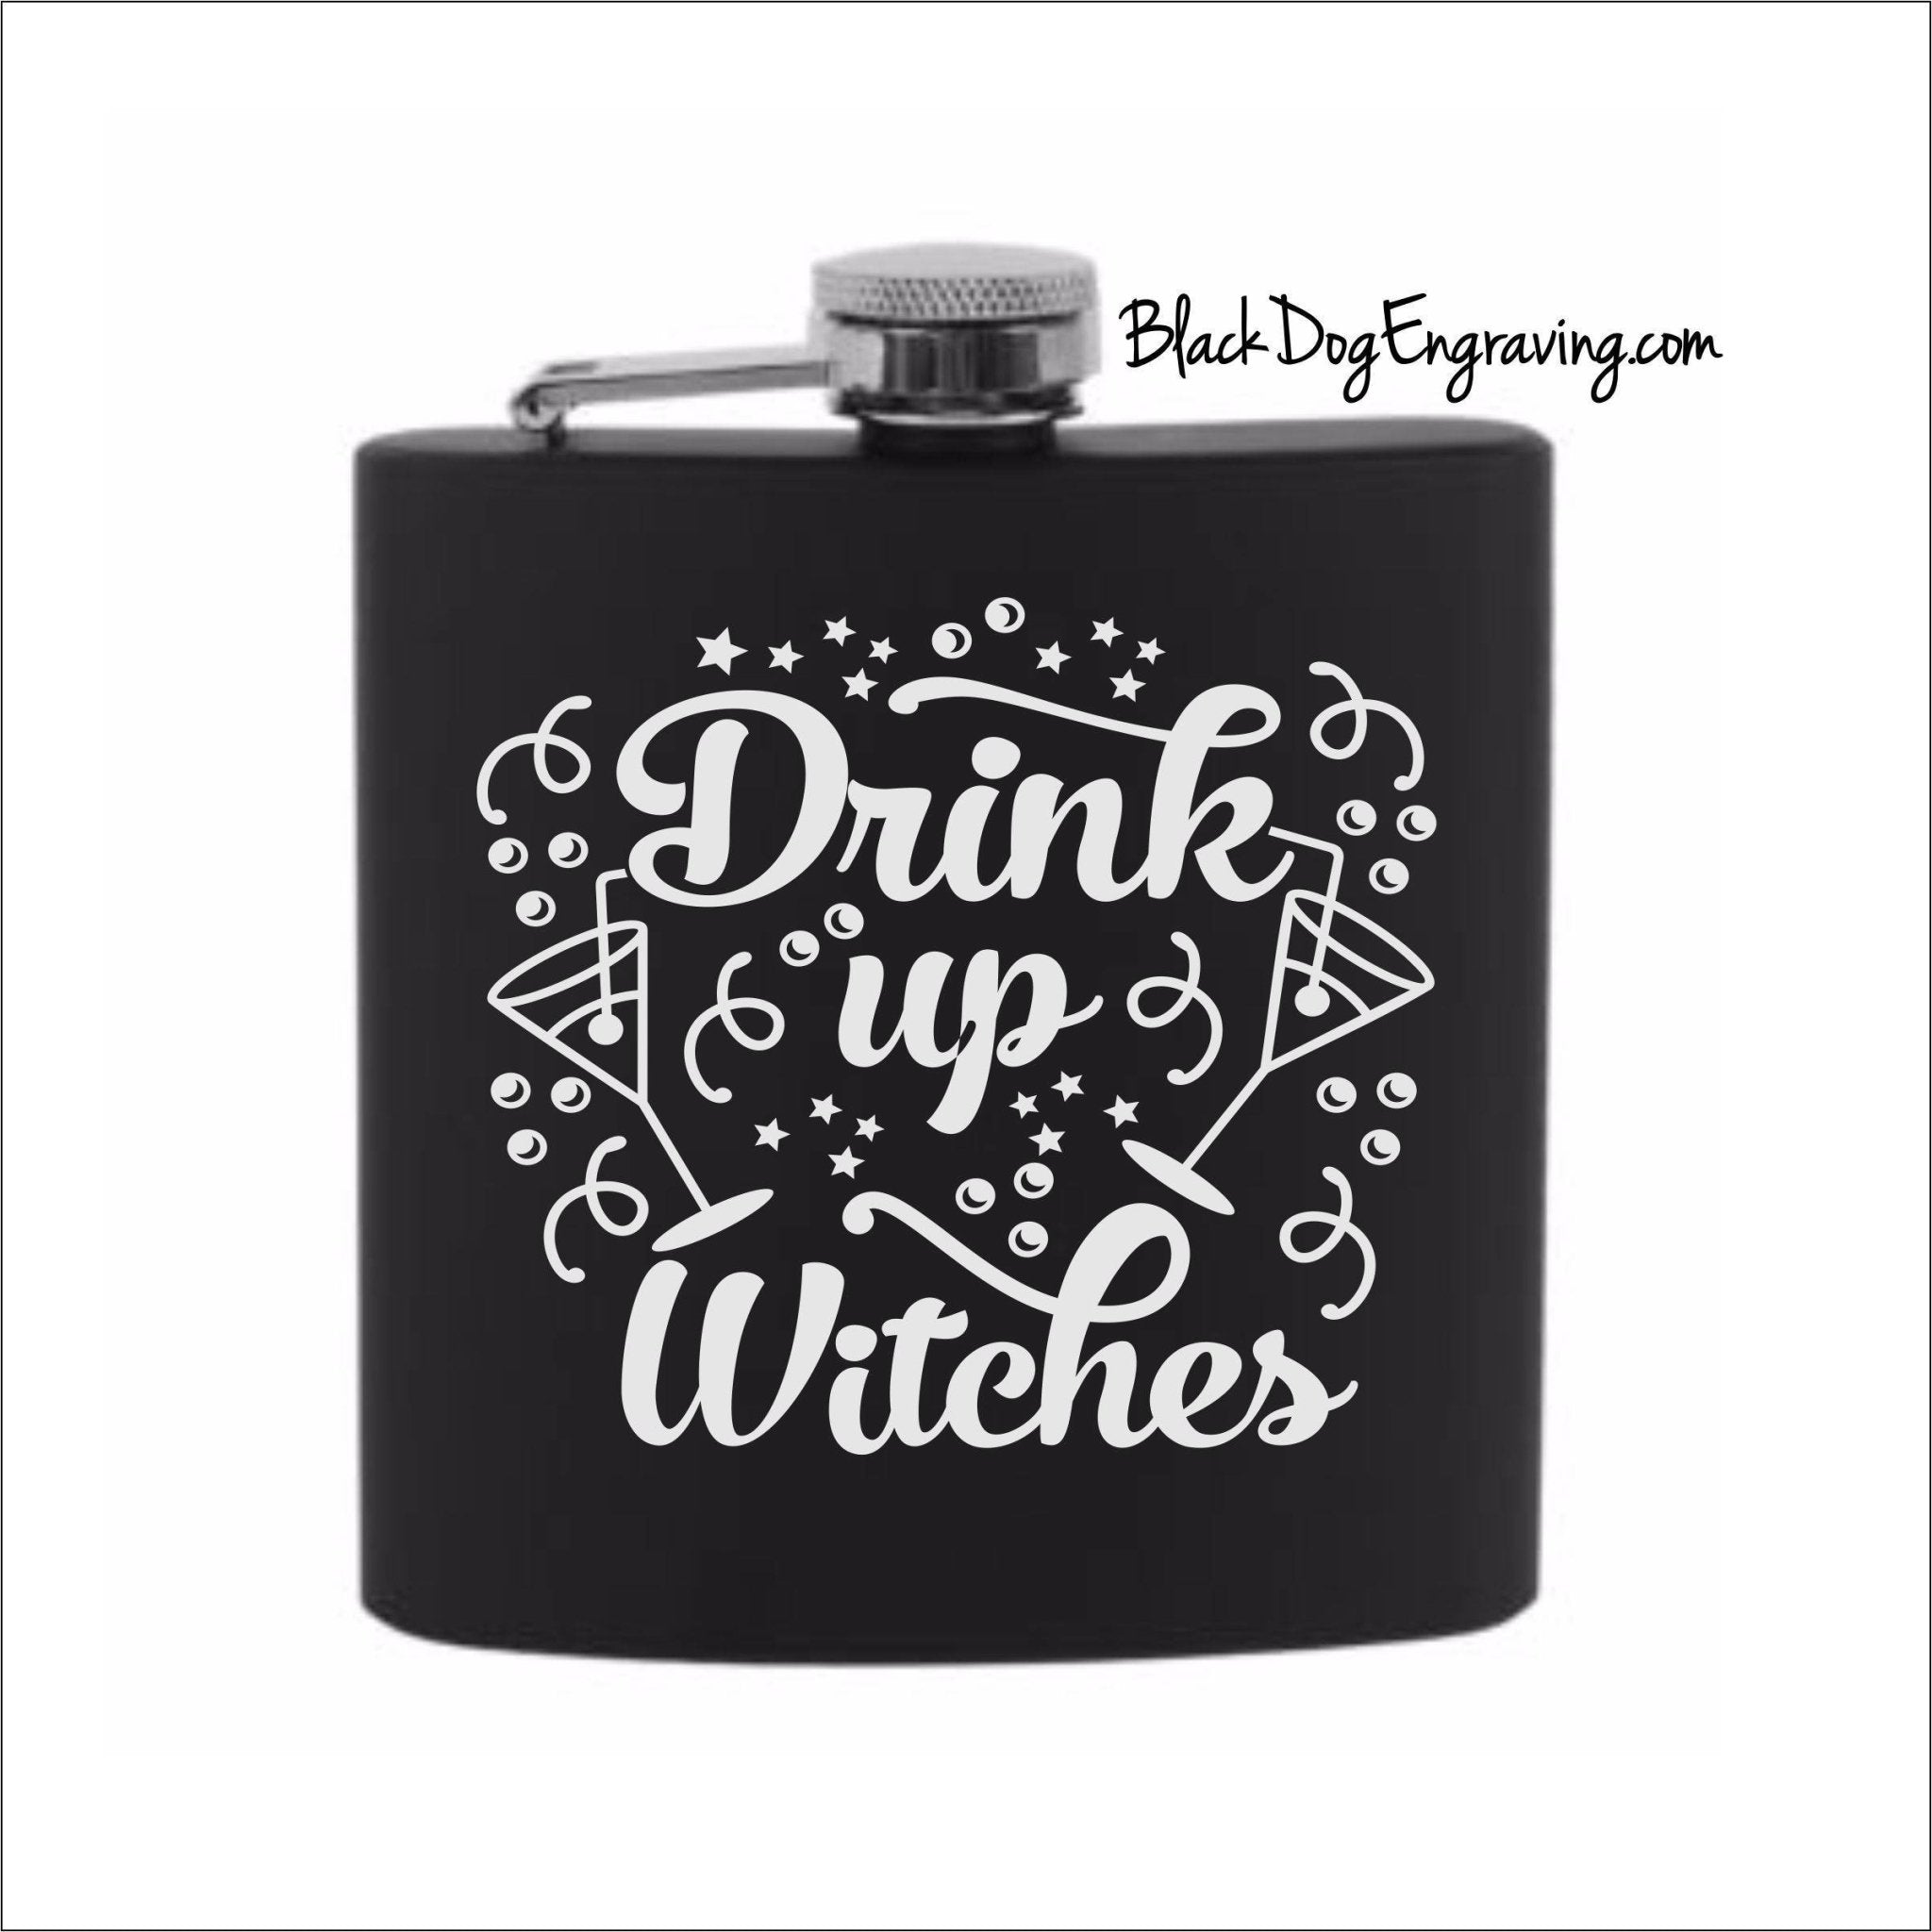 Drink Up Witches Halloween Flask – Black Dog Engraving